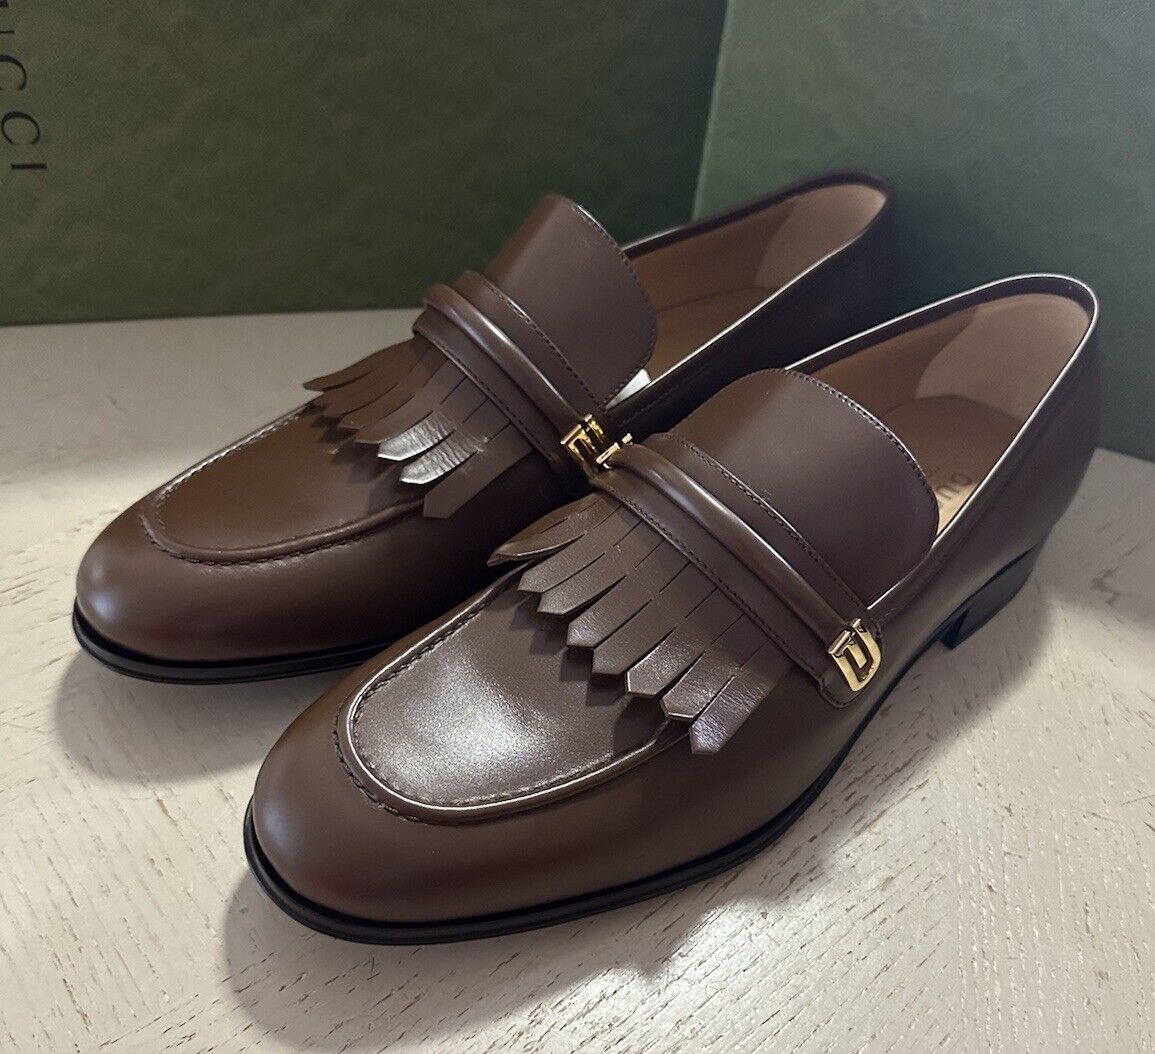 Gucci Mens Loafers Moccasin GG Logo Shoes Brown 12 US/11 UK 714680 New